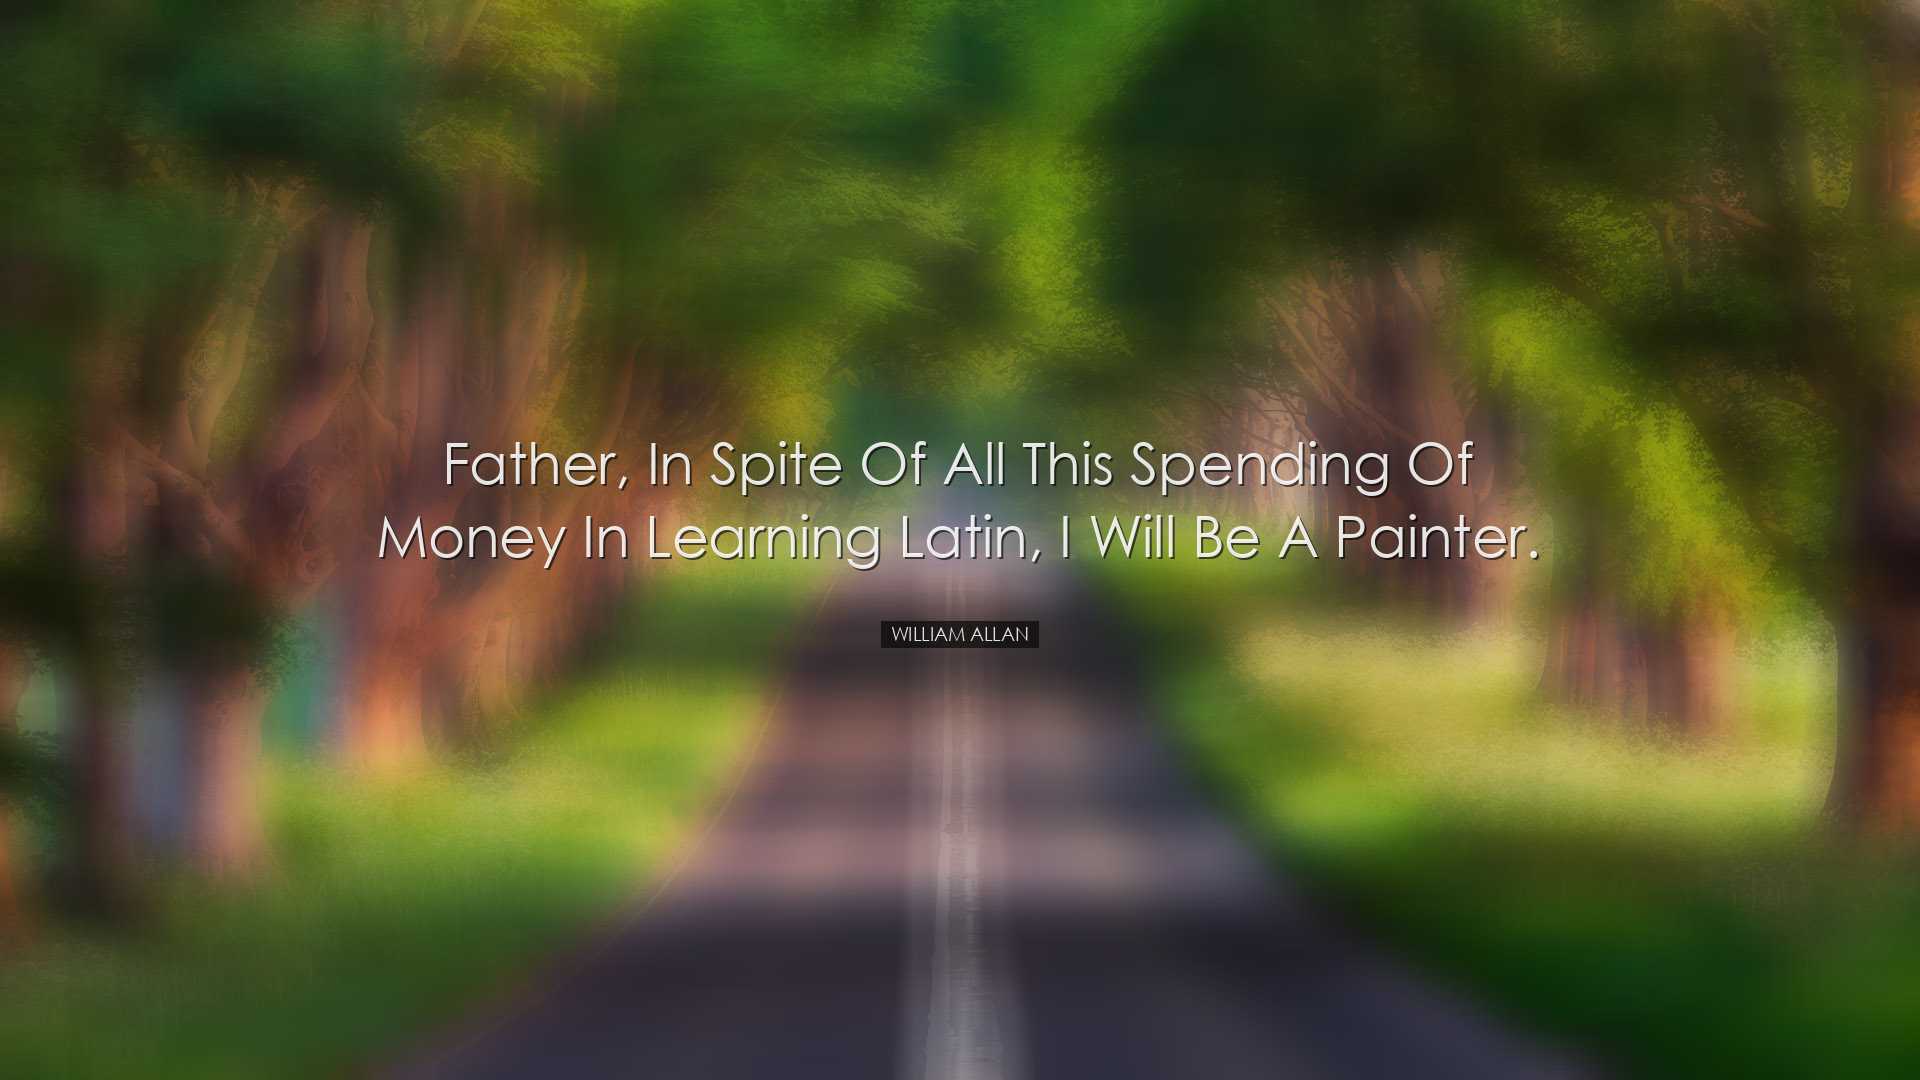 Father, in spite of all this spending of money in learning Latin,